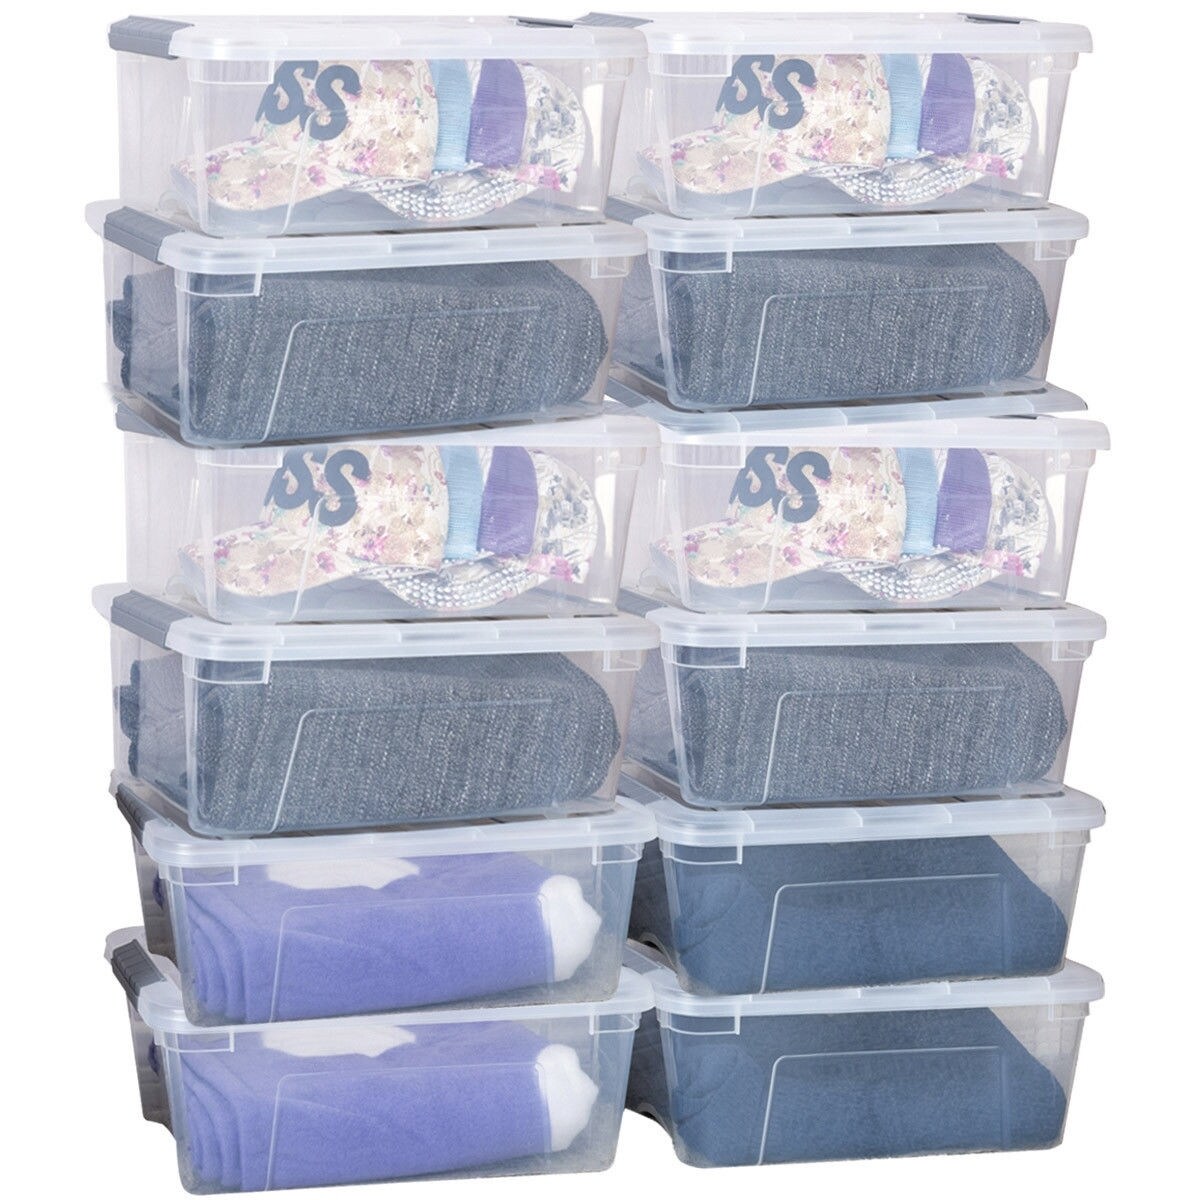 https://ak1.ostkcdn.com/images/products/is/images/direct/facf91ce1d7508835385f8a334b41aefa710a63f/Sturdy-Plastic-Latch-Stack-Storage-Tubs-Box.jpg